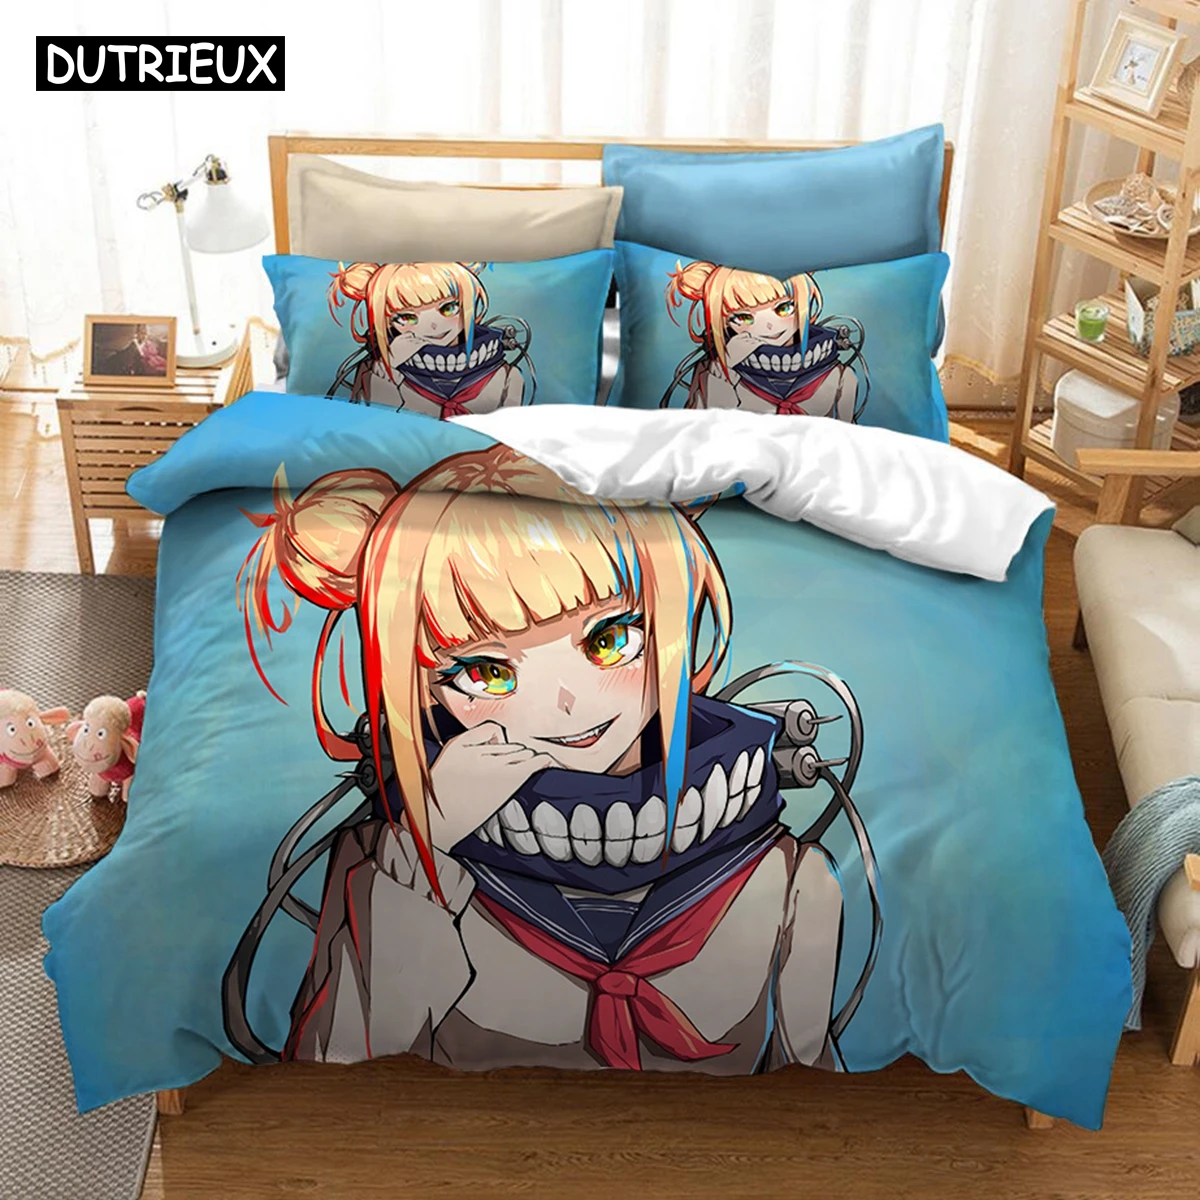 

3D Printed Bedding Set Japan Anime My Hero Academia Duvet Covers With Pillowcases Bedclothes Bed Linen